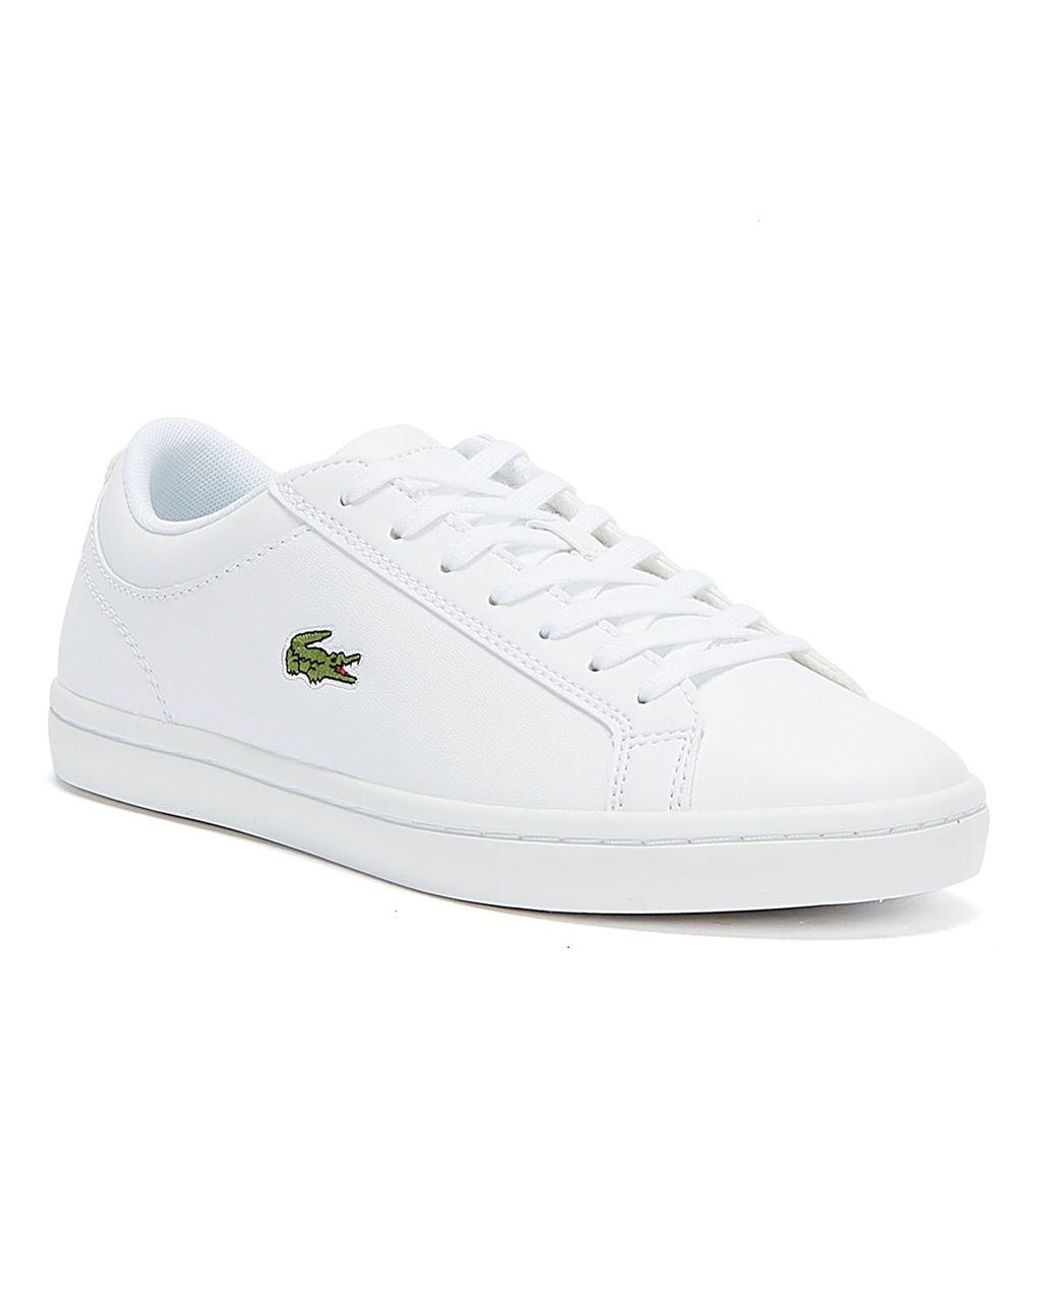 Lacoste Straightset Bl1 Spw Trainers in White - Save 54% - Lyst